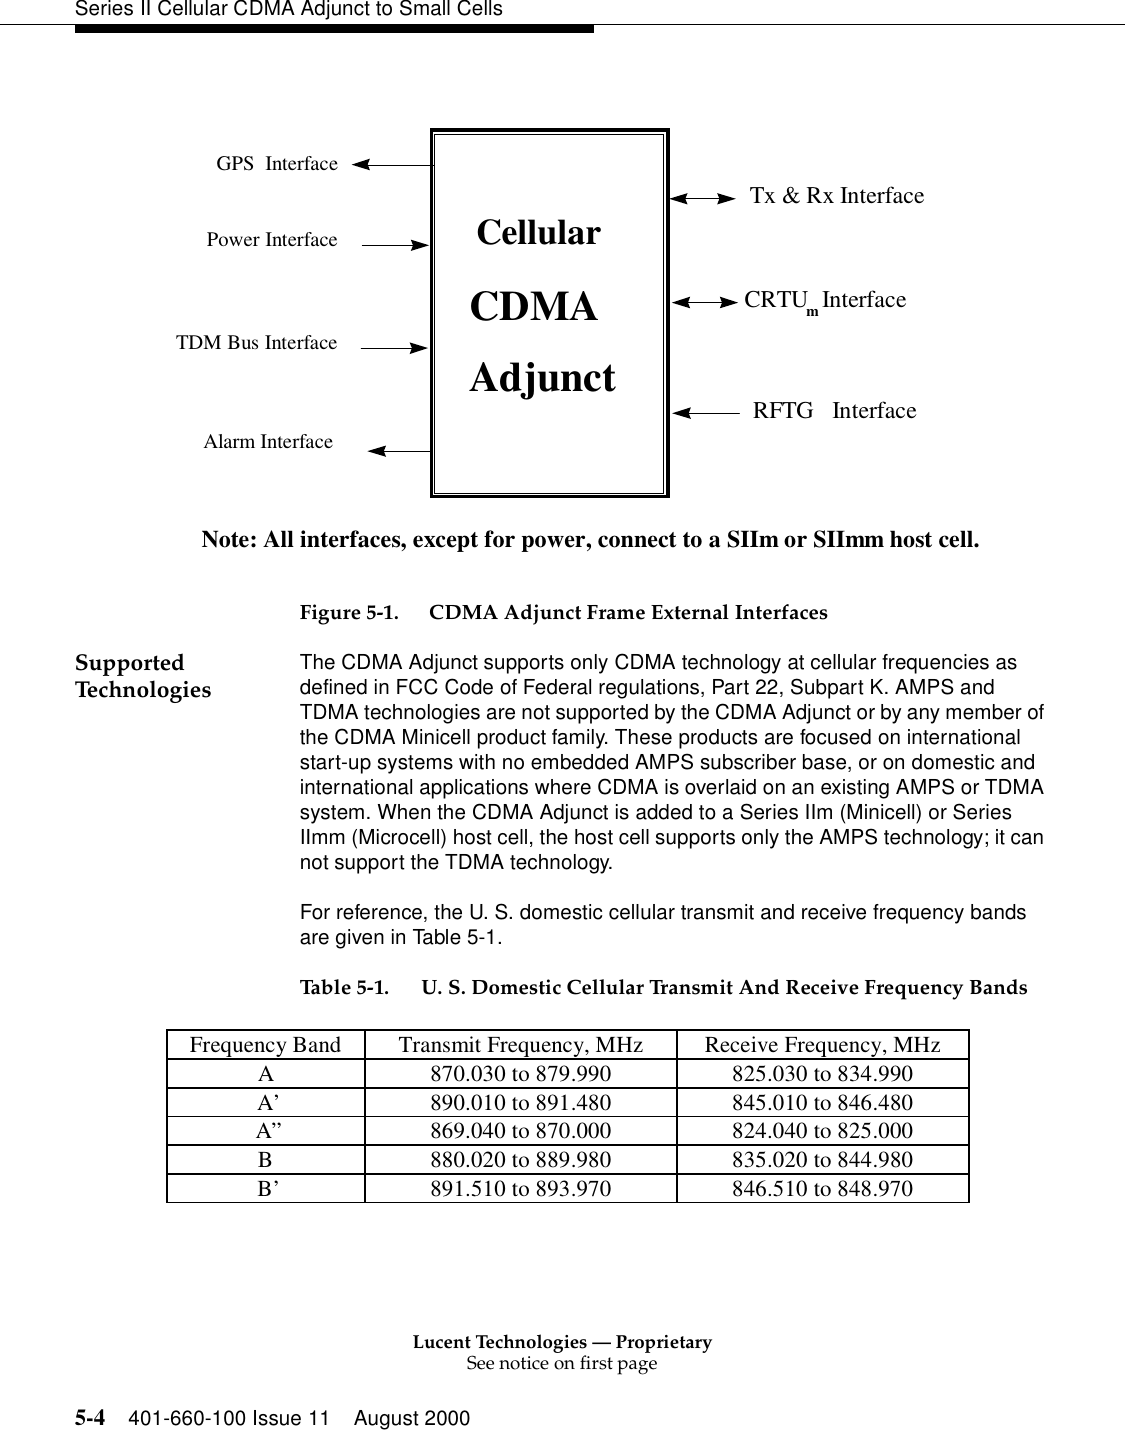 Lucent Technologies — ProprietarySee notice on first page5-4 401-660-100 Issue 11 August 2000Series II Cellular CDMA Adjunct to Small CellsFigure 5-1. CDMA Adjunct Frame External InterfacesSupported Technologies The CDMA Adjunct supports only CDMA technology at cellular frequencies as defined in FCC Code of Federal regulations, Part 22, Subpart K. AMPS and TDMA technologies are not supported by the CDMA Adjunct or by any member of the CDMA Minicell product family. These products are focused on international start-up systems with no embedded AMPS subscriber base, or on domestic and international applications where CDMA is overlaid on an existing AMPS or TDMA system. When the CDMA Adjunct is added to a Series IIm (Minicell) or Series IImm (Microcell) host cell, the host cell supports only the AMPS technology; it can not support the TDMA technology. For reference, the U. S. domestic cellular transmit and receive frequency bands are given in Table 5-1.Table 5-1. U. S. Domestic Cellular Transmit And Receive Frequency Bands    Cellular  CDMA  AdjunctPower InterfaceTDM Bus InterfaceAlarm InterfaceTx &amp; Rx InterfaceRFTG  InterfaceCRTUmInterfaceGPS  InterfaceNote: All interfaces, except for power, connect to a SIIm or SIImm host cell.Frequency Band Transmit Frequency, MHz Receive Frequency, MHzA 870.030 to 879.990 825.030 to 834.990 A’890.010 to 891.480 845.010 to 846.480 A”869.040 to 870.000 824.040 to 825.000B 880.020 to 889.980 835.020 to 844.980 B’891.510 to 893.970 846.510 to 848.970